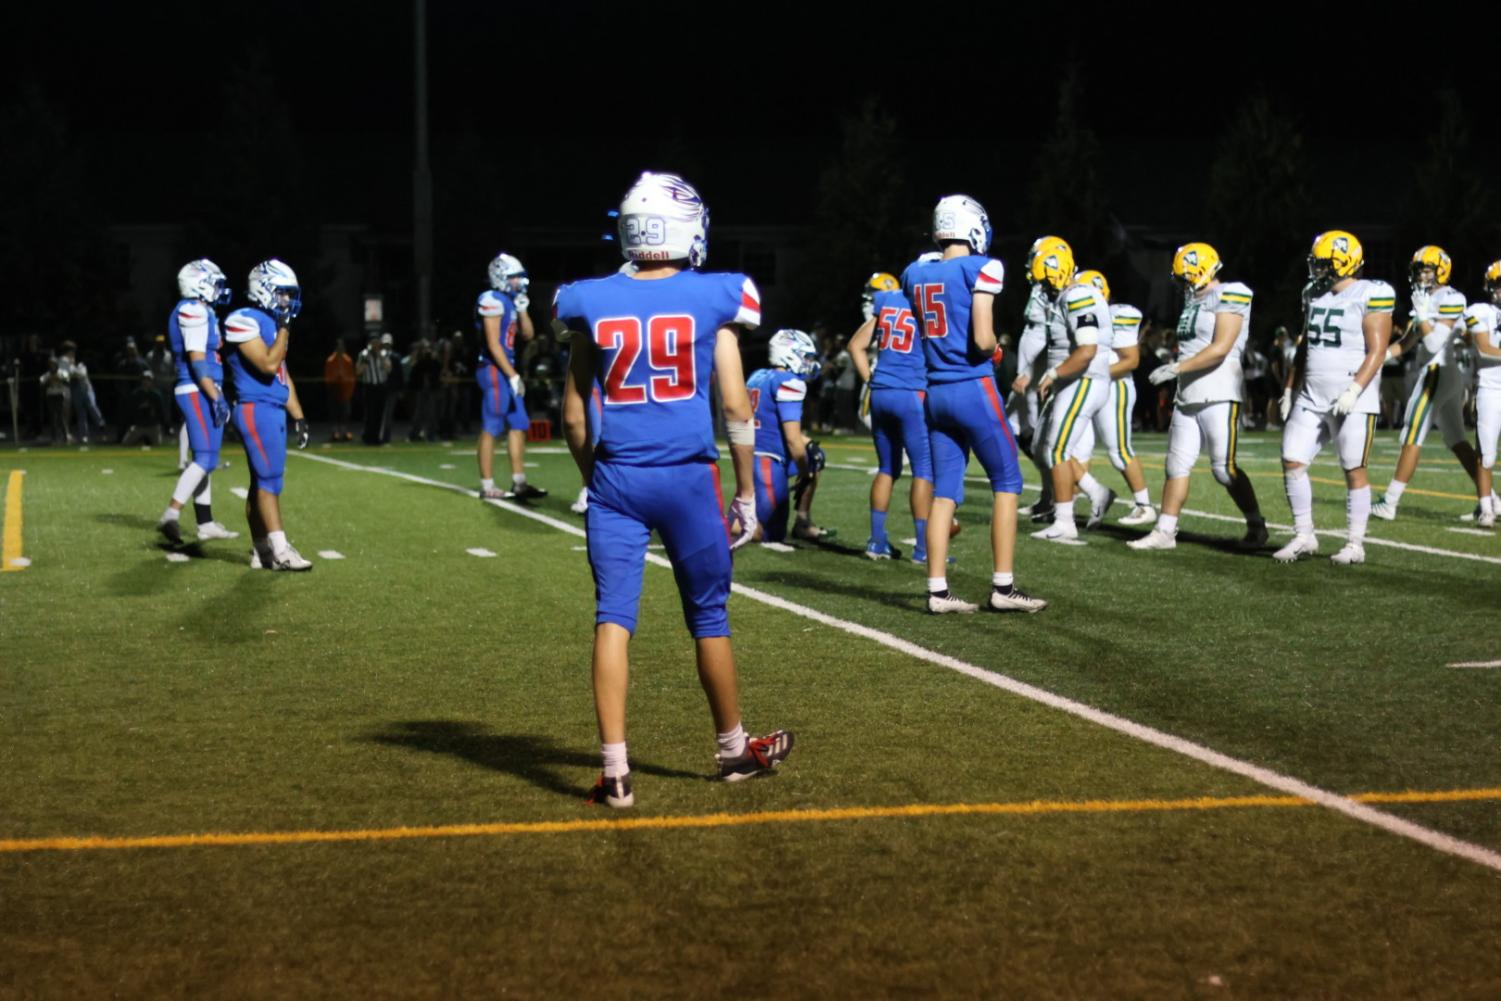 Photo+Story%3A+La+Salle+Football+Plays+Rex+Putnam+High+School+at+Home